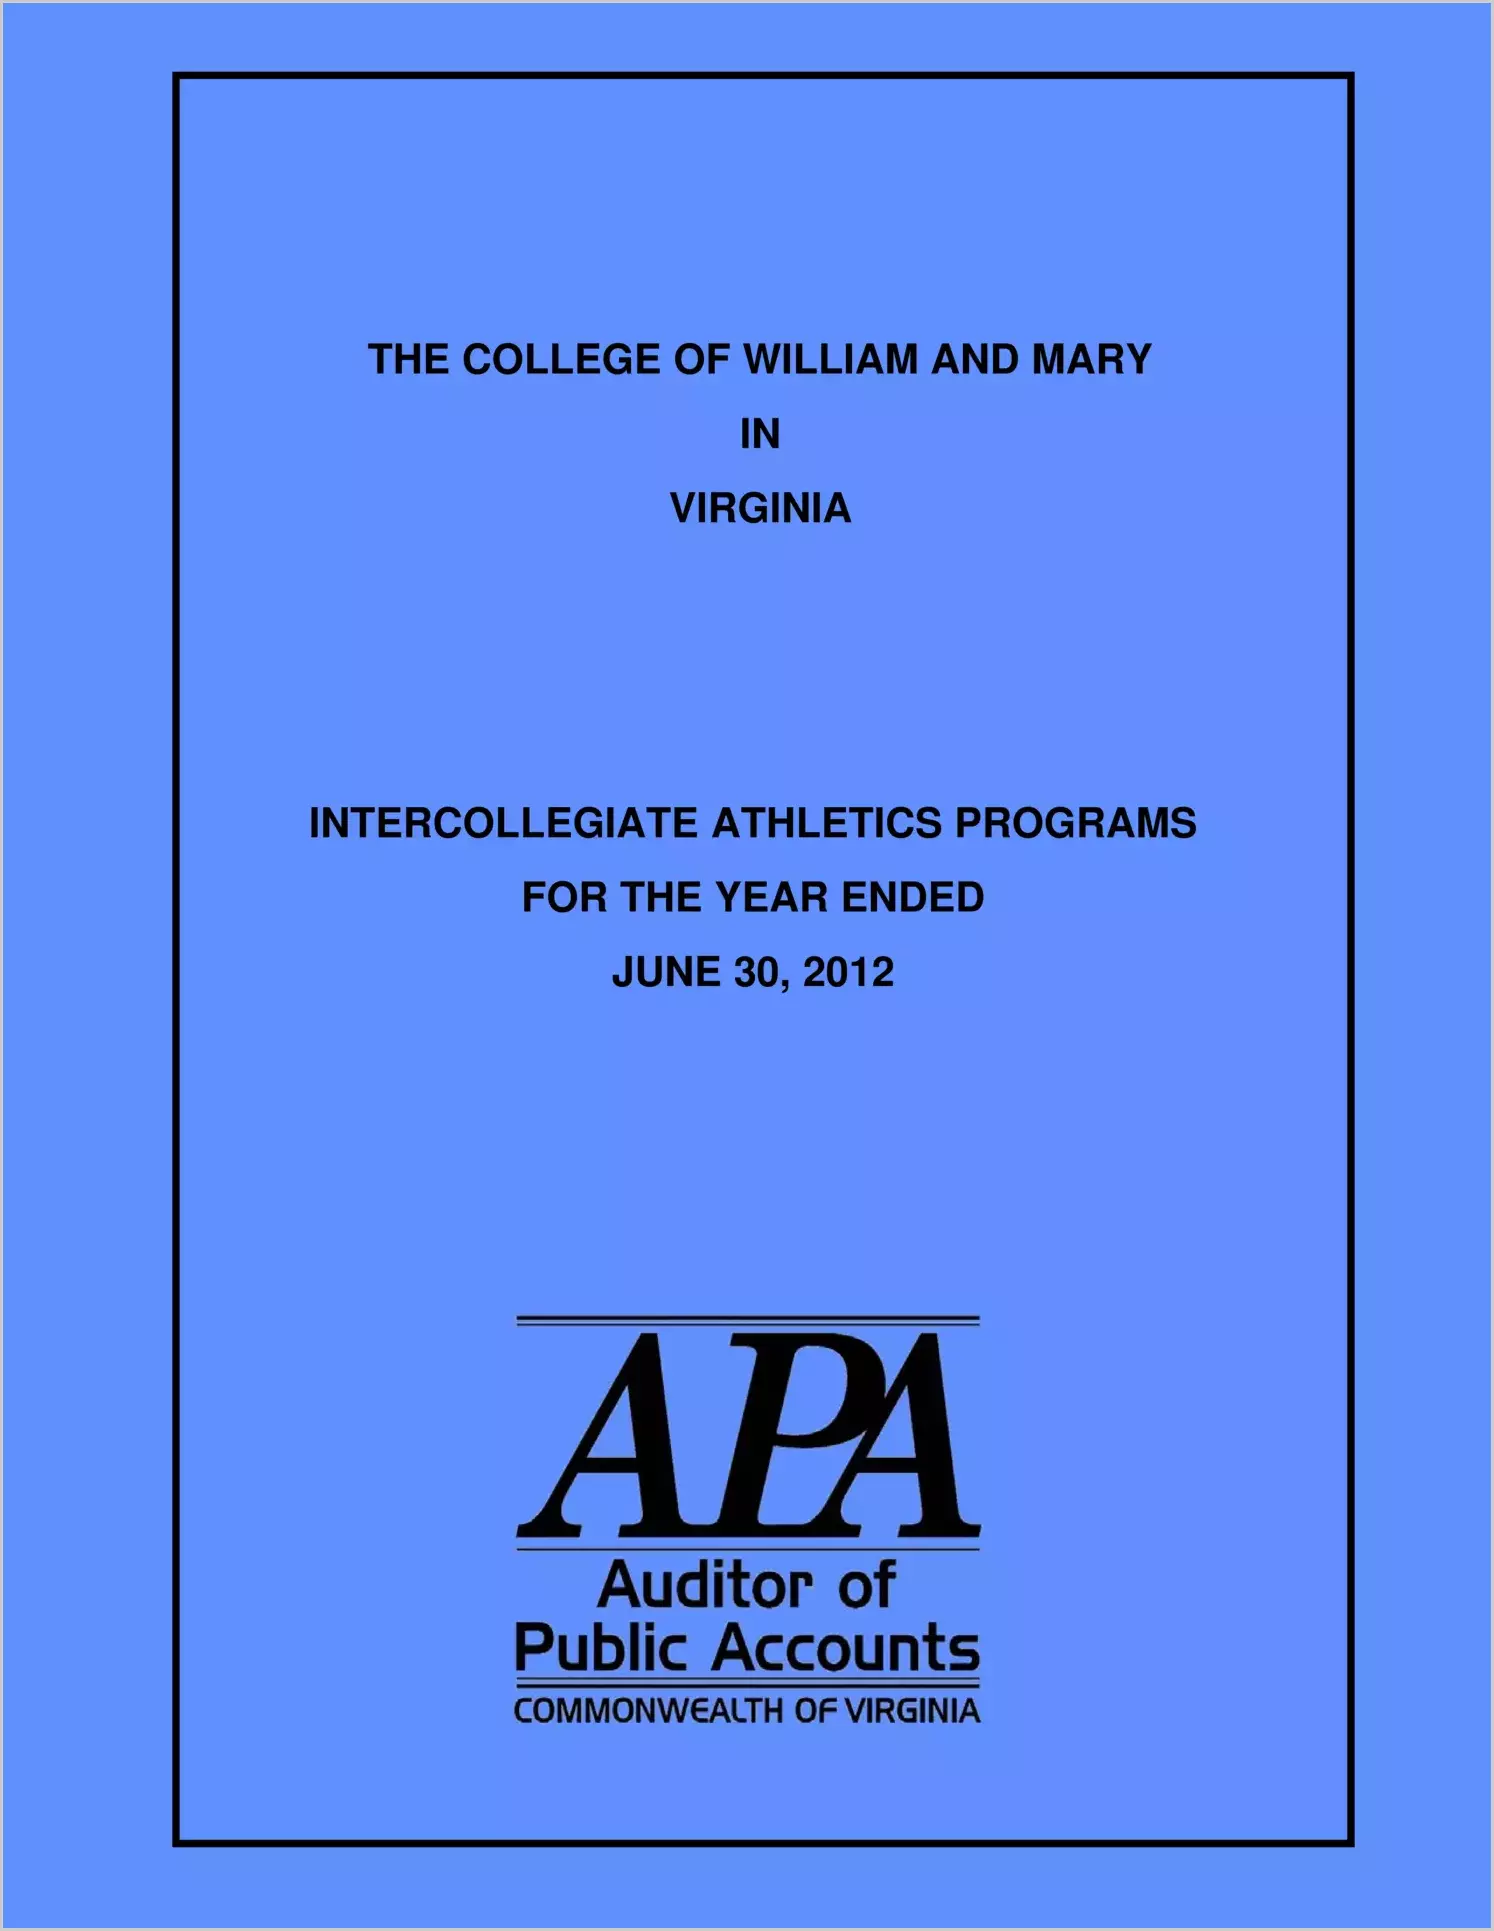 The College of William and Mary in Virginia Intercollegiate Athletics Programs for the year ended June 30, 2012